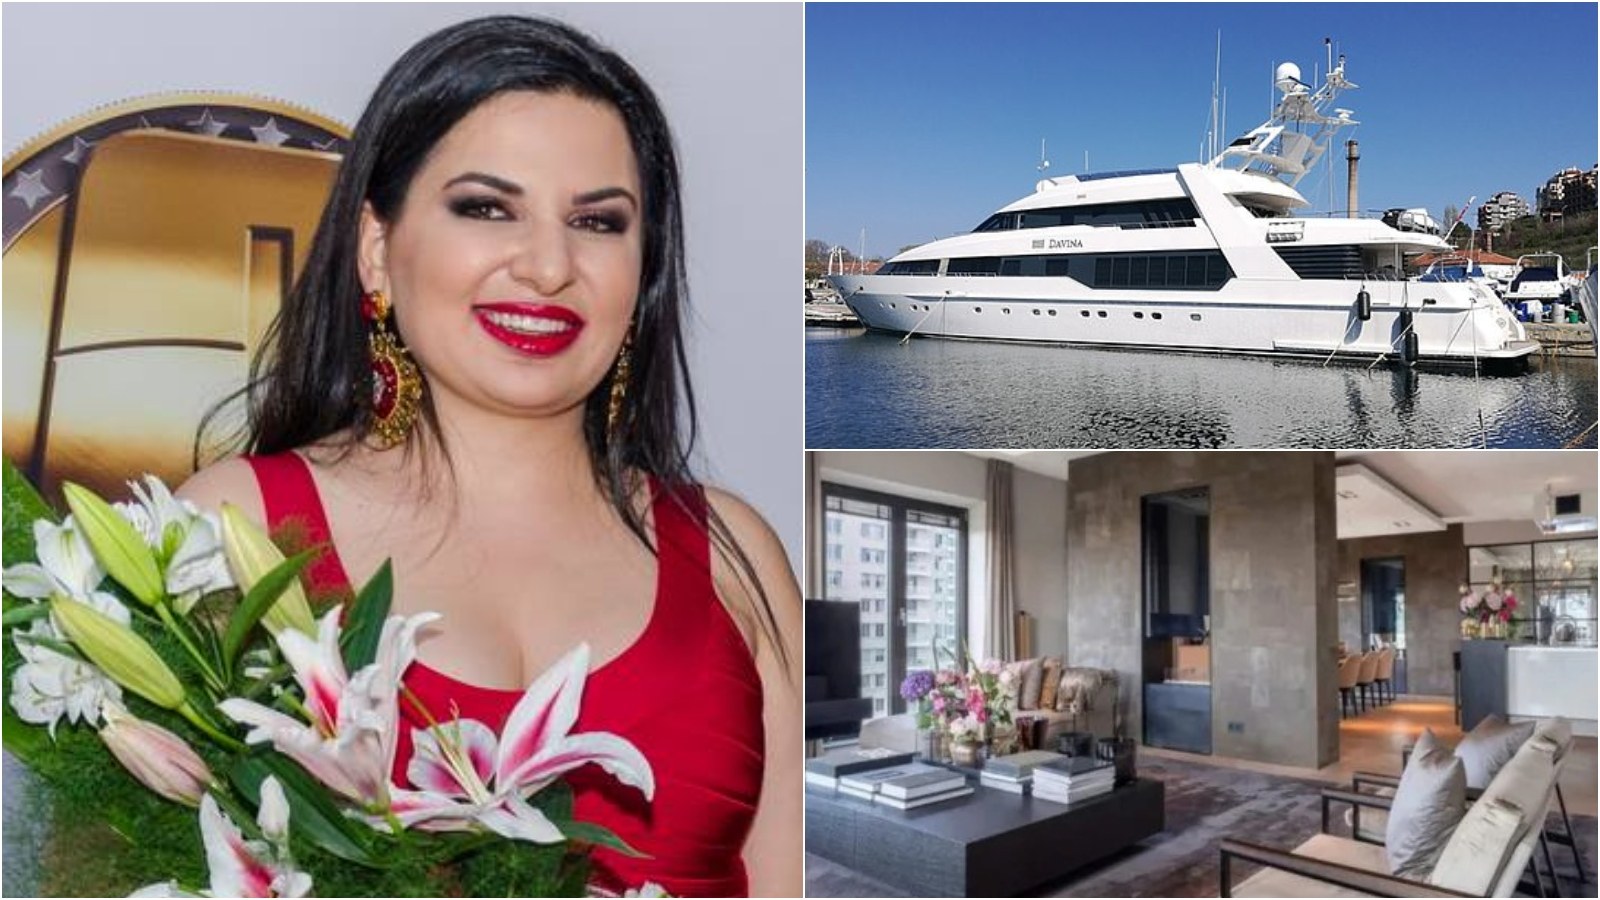 The crazy rich lifestyle of Ruja Ignatova – the glamorous crypto swindler, with a London penthouse, Bulgarian resort mansion and luxury superyacht. Photos: Luxurylaunches; Cryptoqueen/Facebook